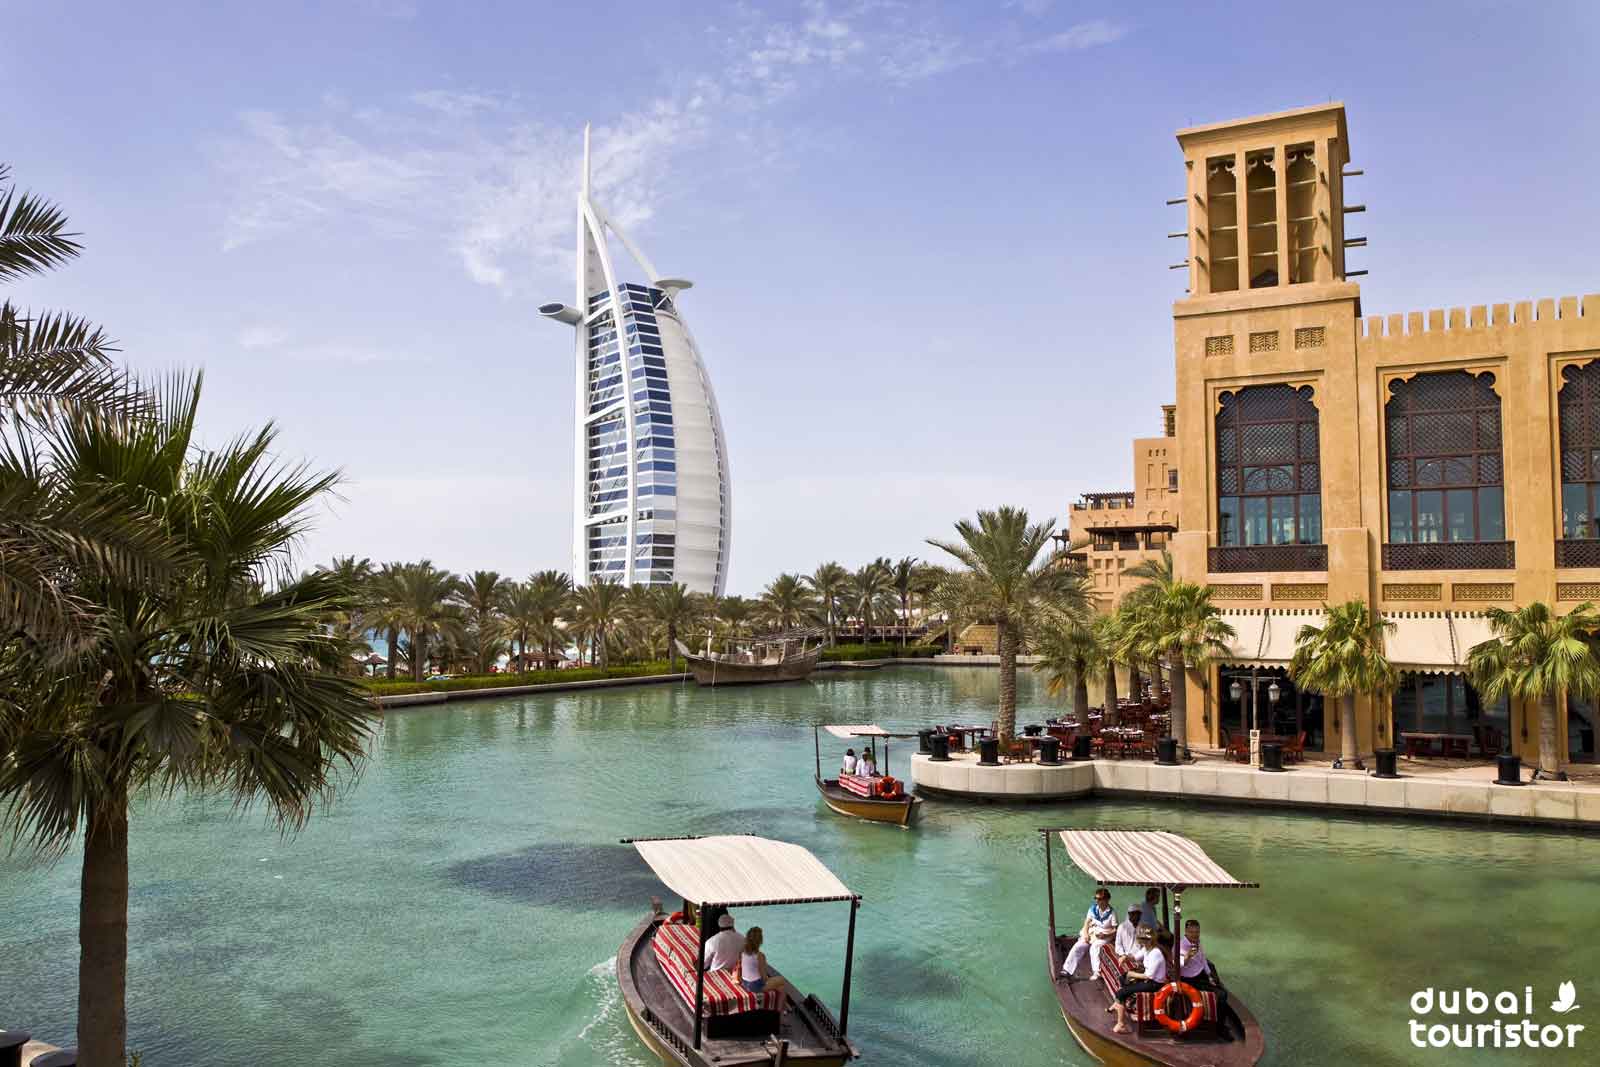 dubai touristor launched by kitmytrip